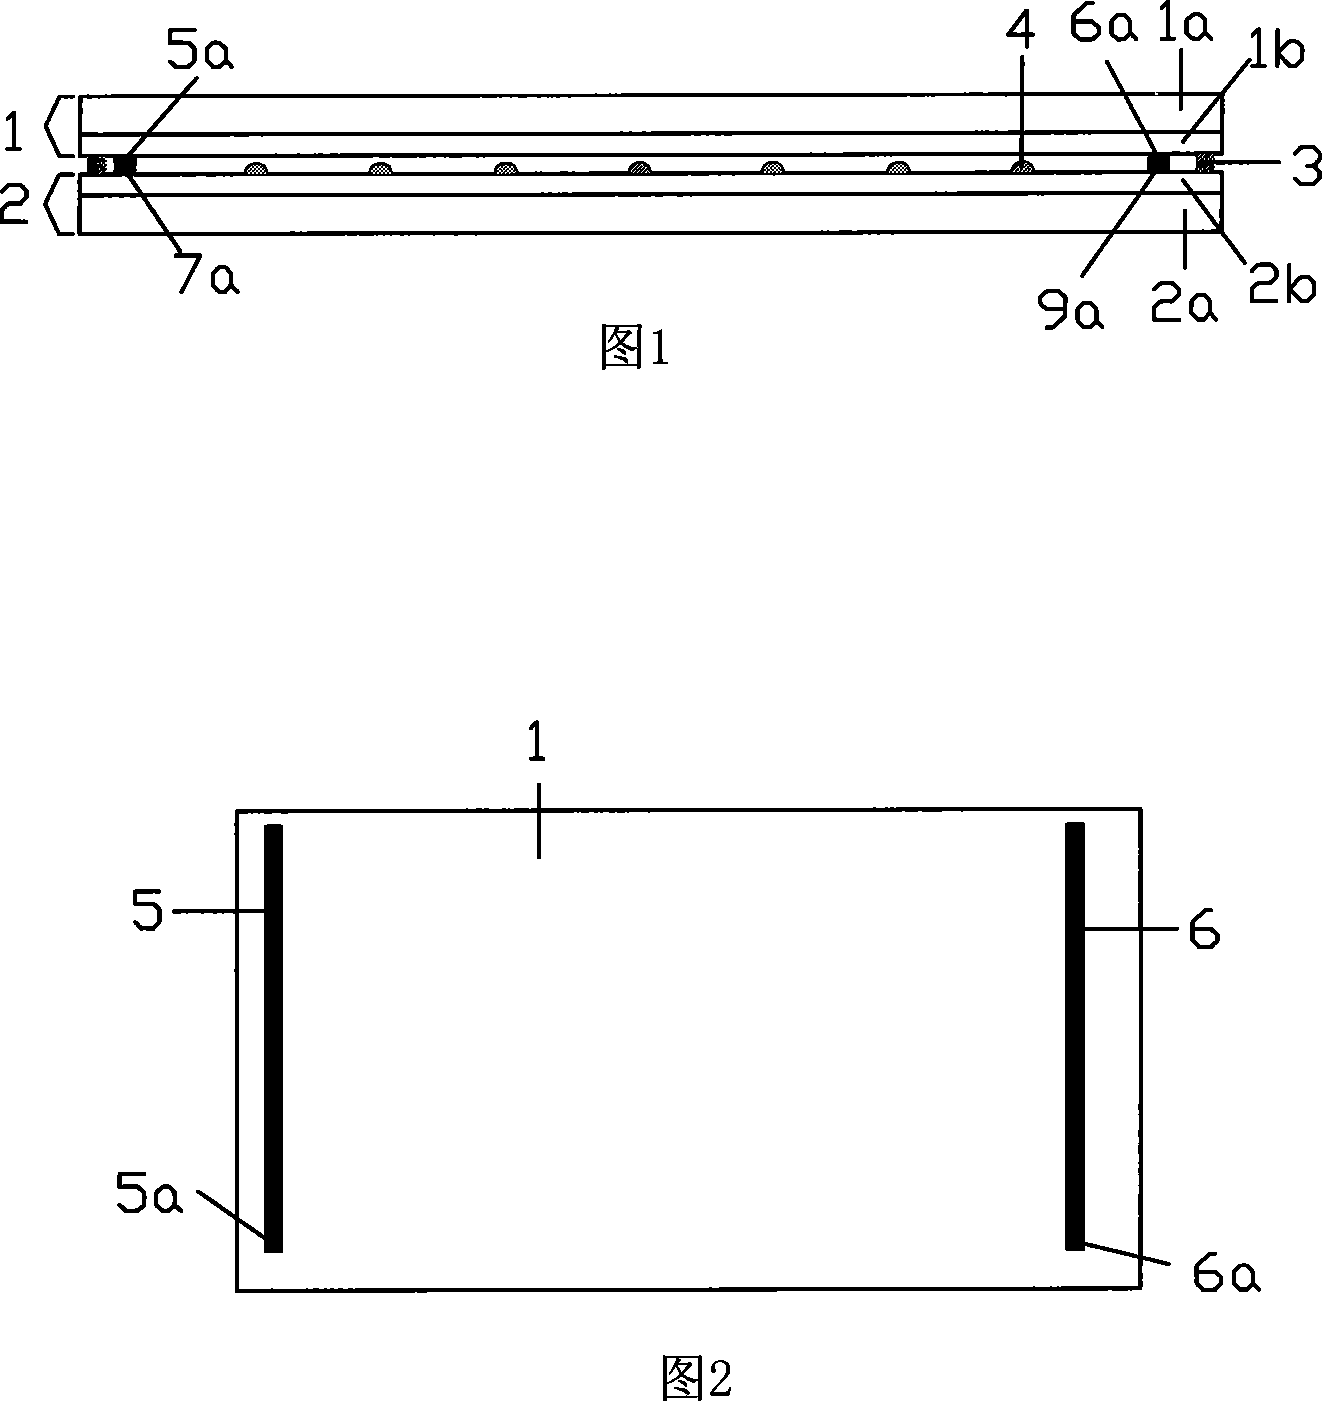 Method for making Electric impedance type glass/glass type touch screen